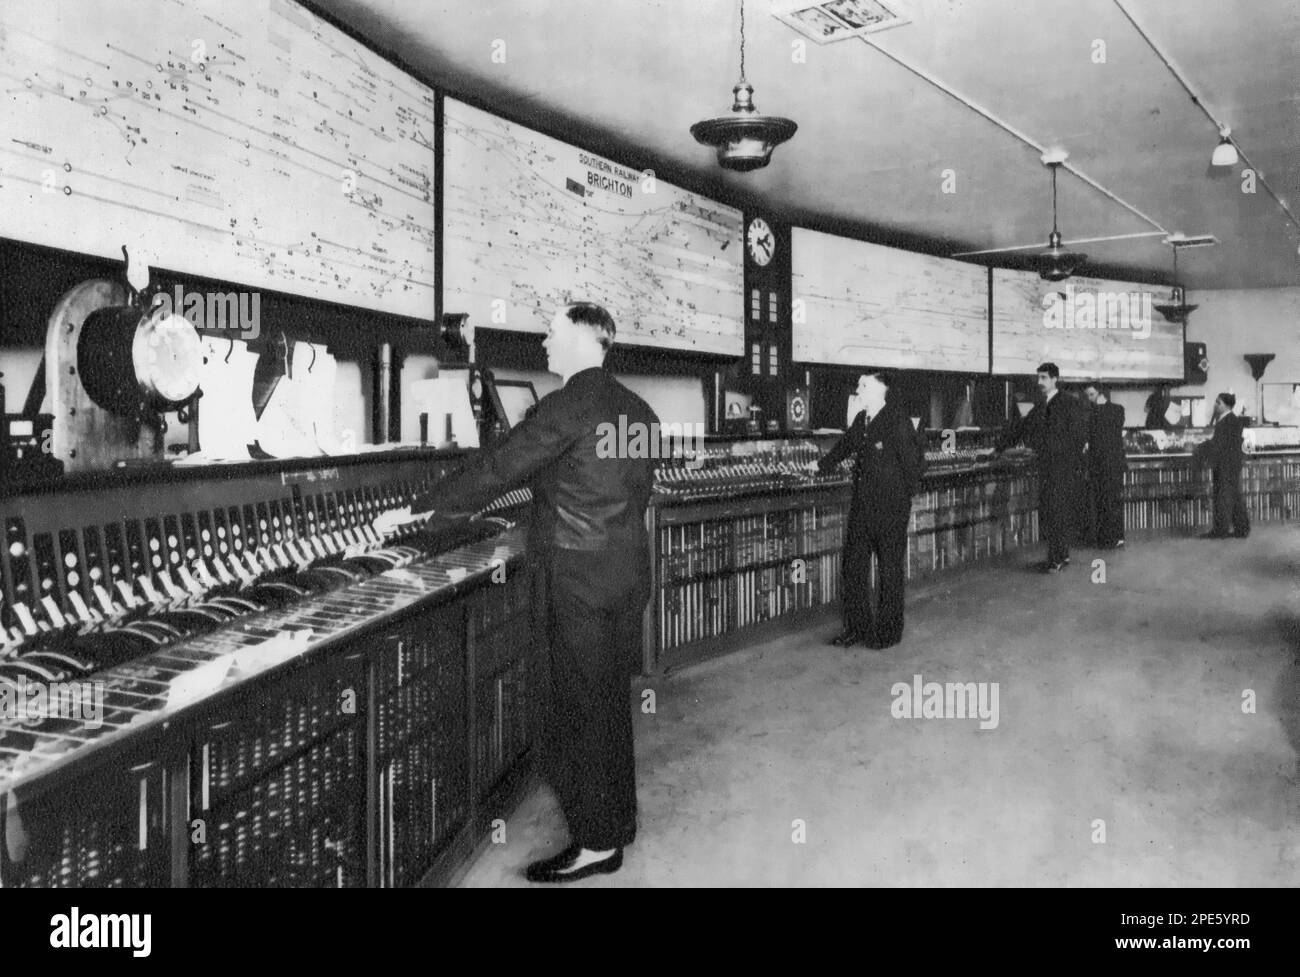 Brighton signal box, c1933. Brighton signal box was erected in 1931/32 by Southern Railway when the London to Brighton line was electrified, opening on the 16th October 1932. Brighton signal box closed on 30th March 1985 and was demolished in April 1985. Stock Photo